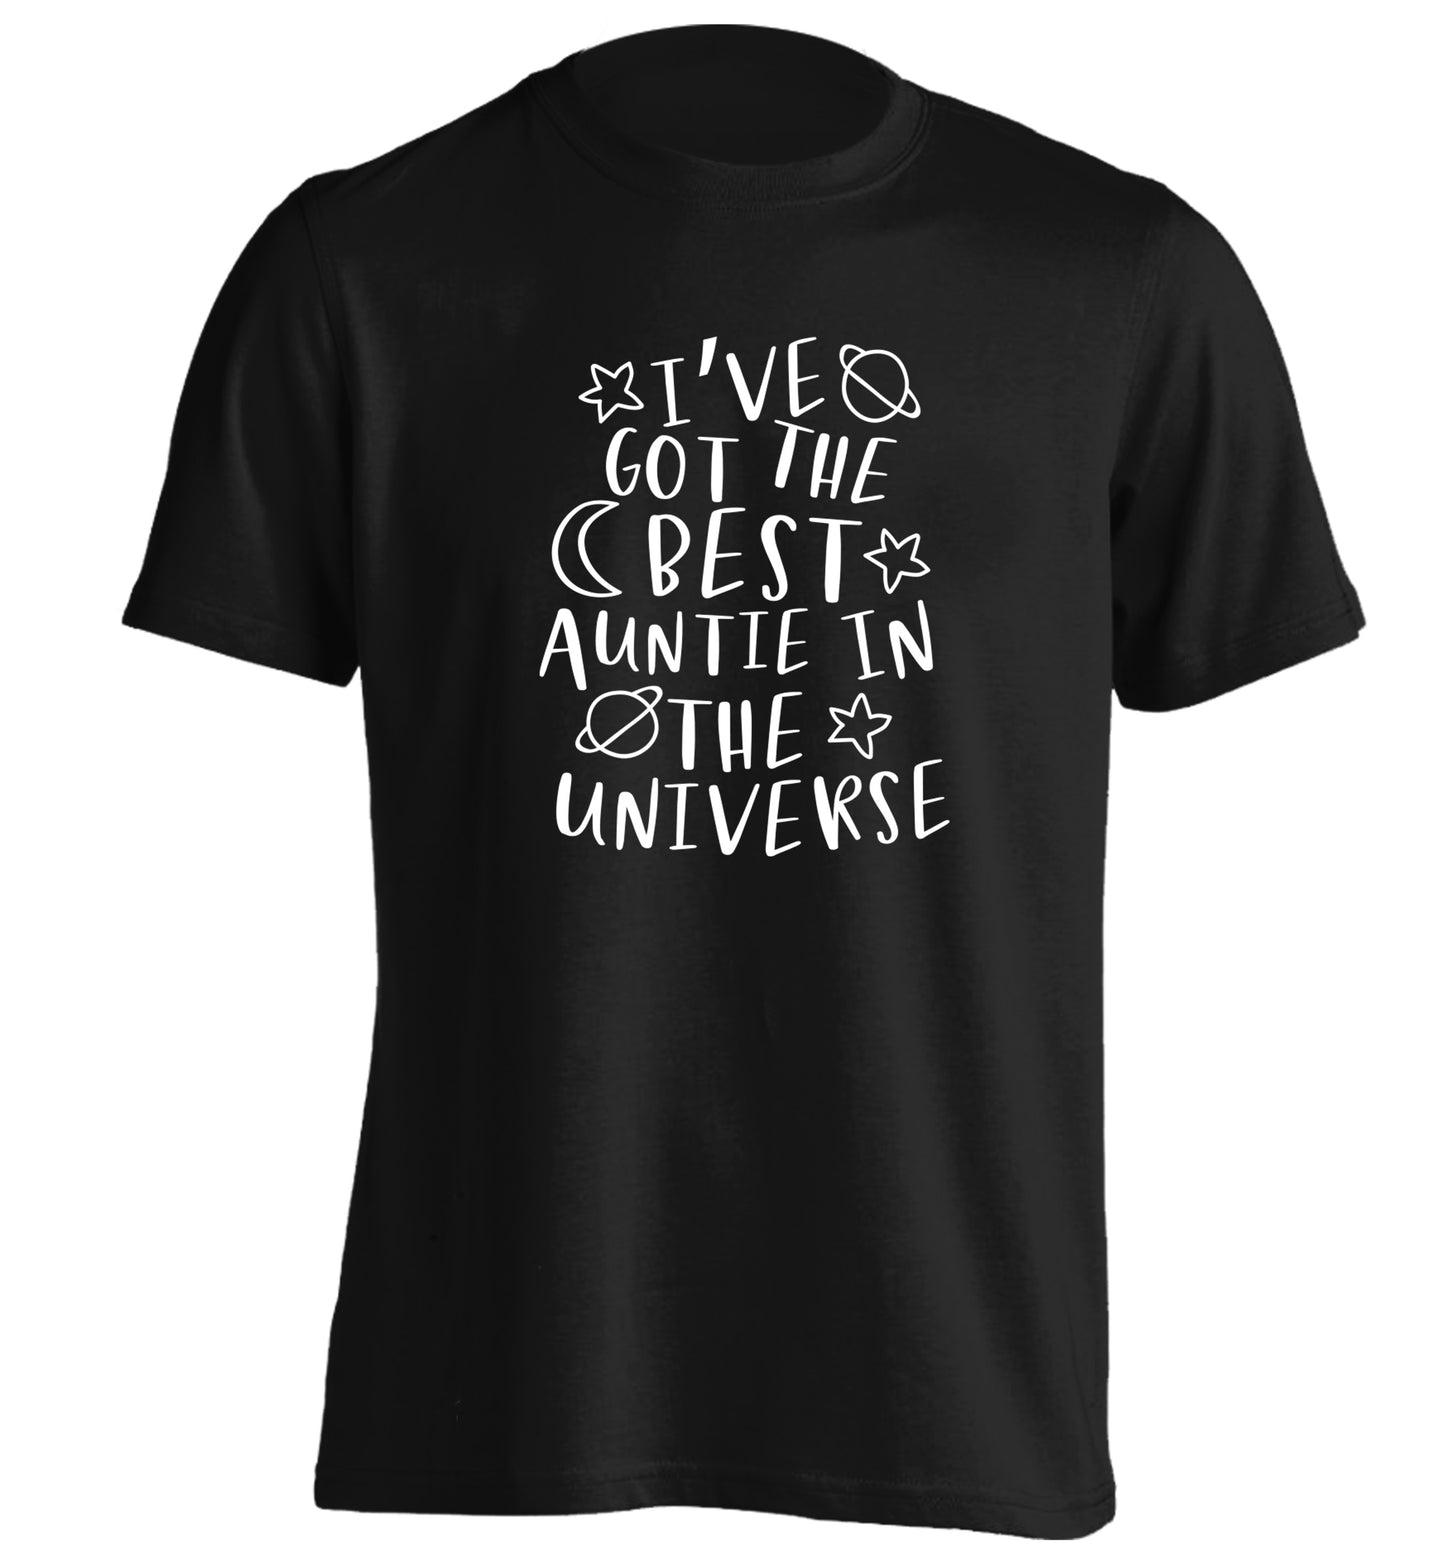 I've got the best auntie in the universe adults unisex black Tshirt 2XL